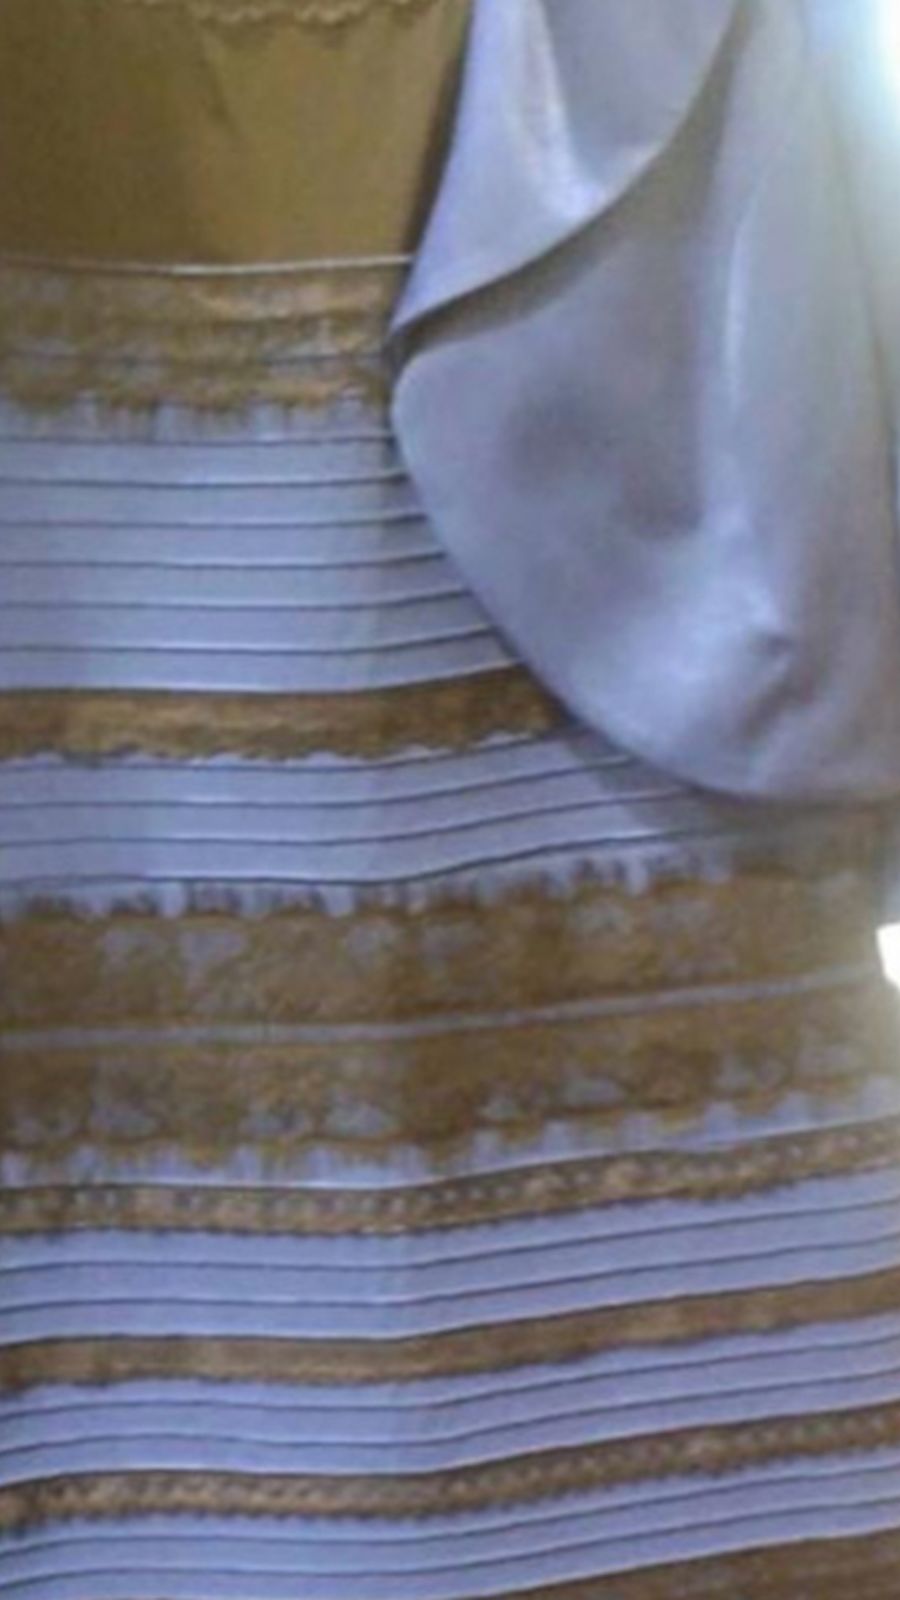 Is That Dress White and Gold or Blue and Black? - The New York Times